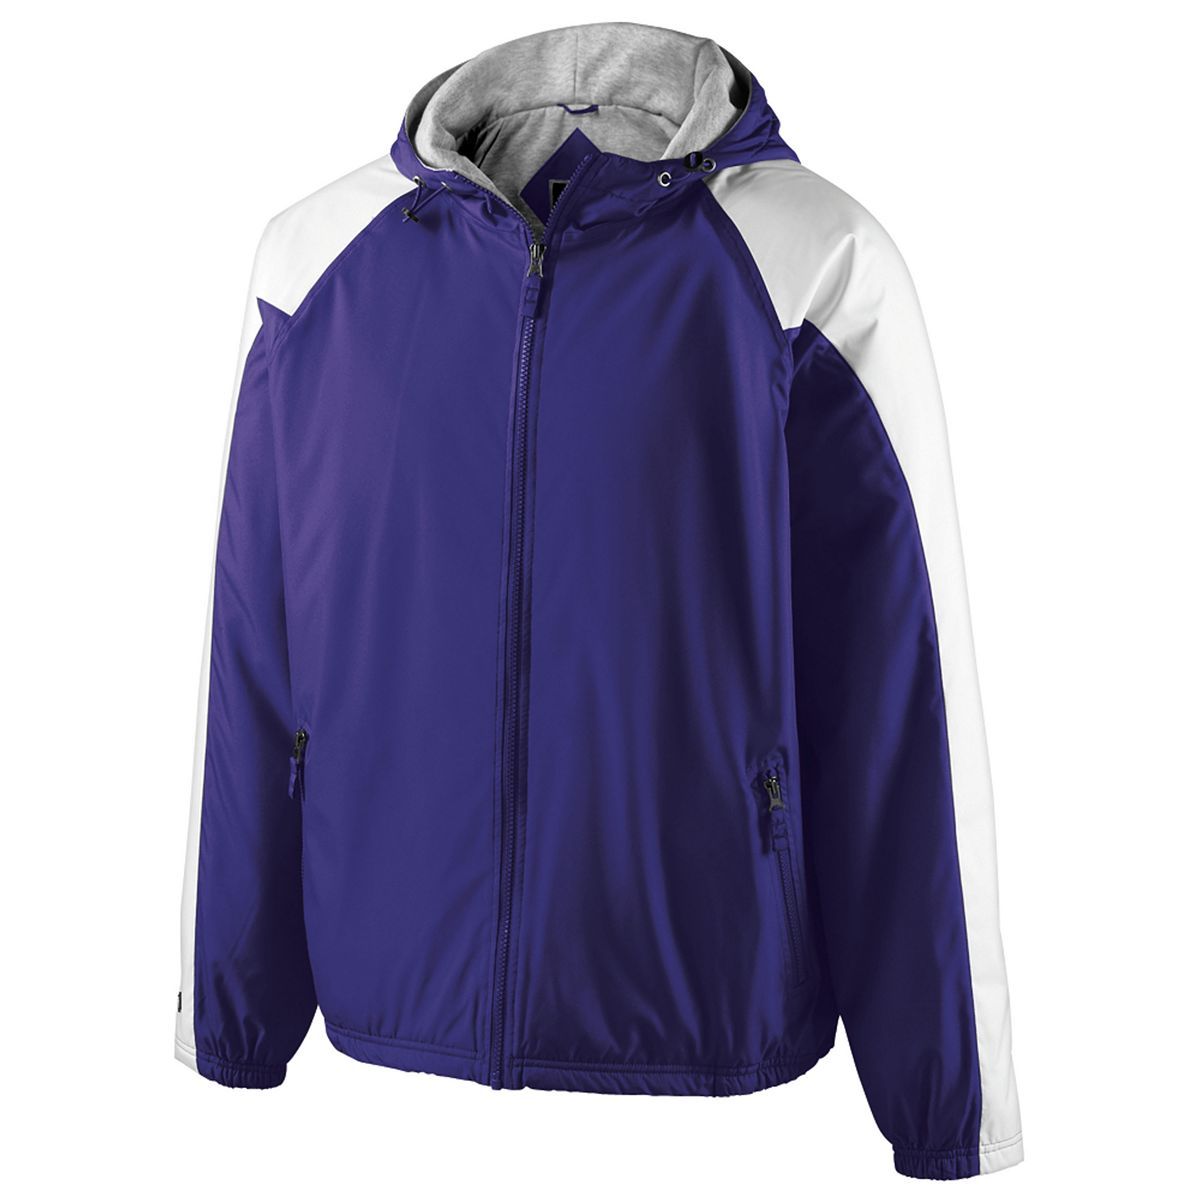 Holloway Homefield Jacket in Purple/White  -Part of the Adult, Adult-Jacket, Holloway, Outerwear product lines at KanaleyCreations.com